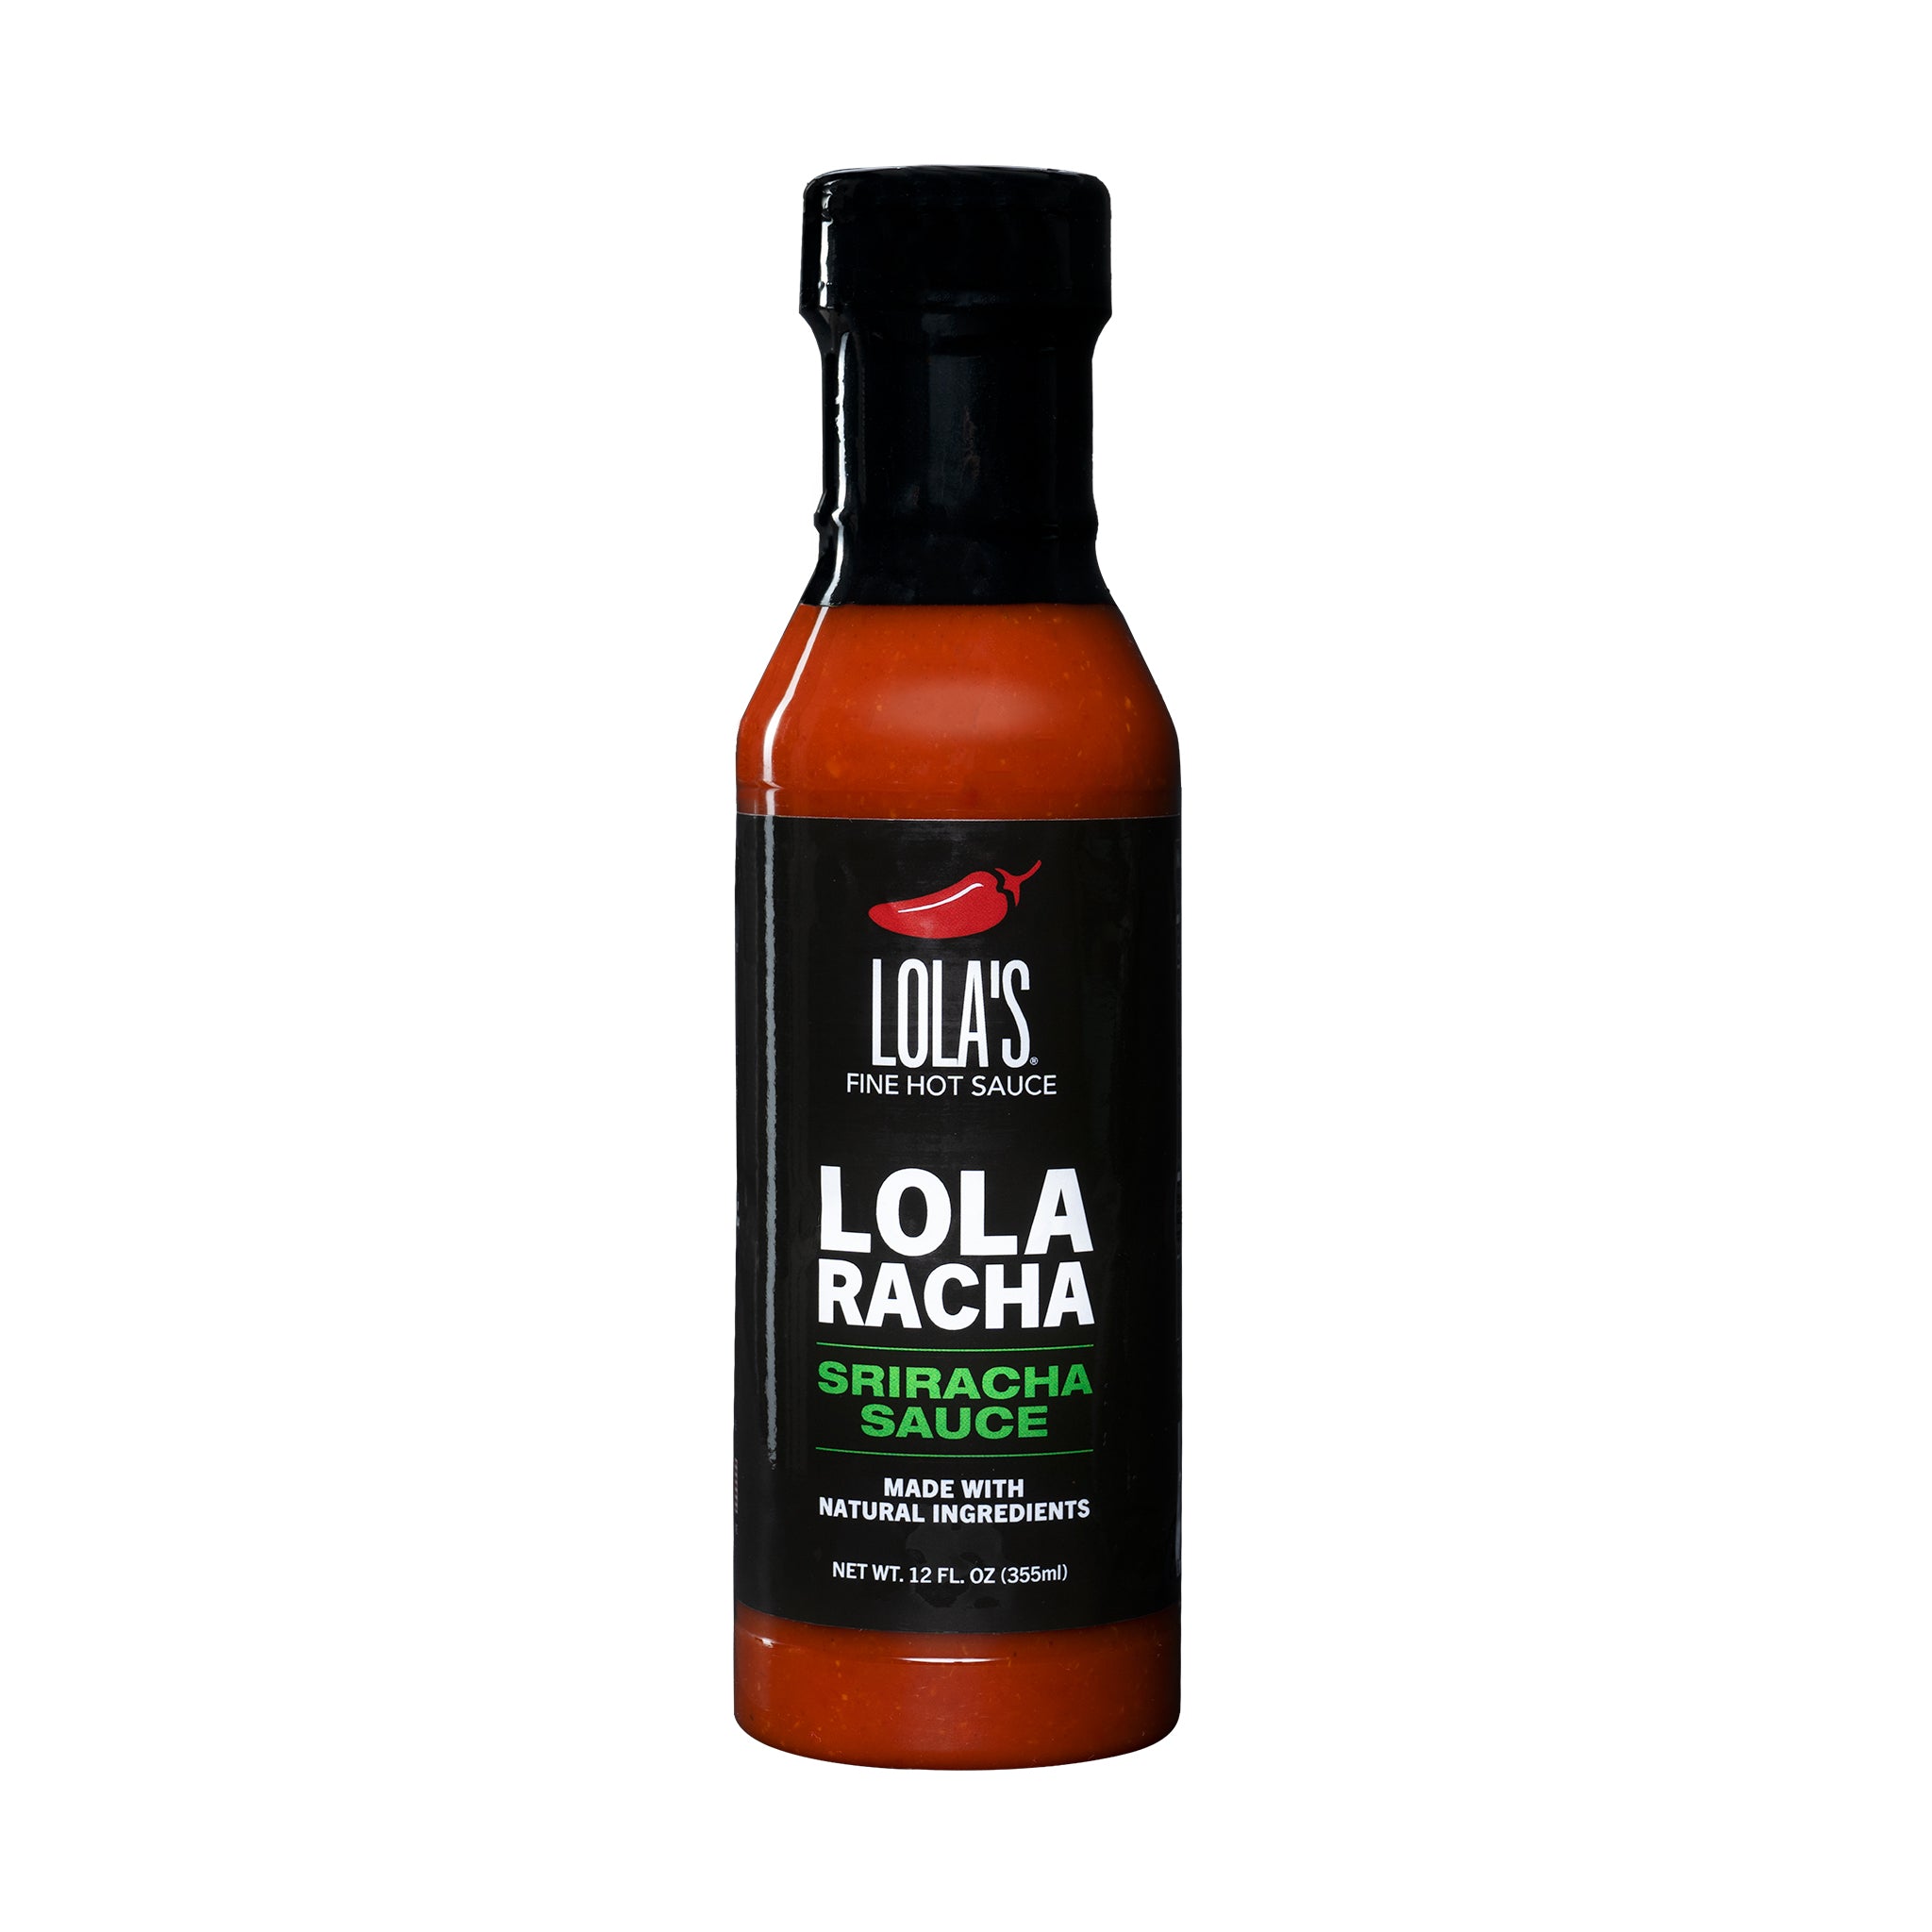  Louisiana Brand Hot Sauce, Sweet Heat with Honey Hot Sauce,  Made with Blend of Honey & Aged Red Peppers (6 Fl Oz (Pack of 1)) : Grocery  & Gourmet Food